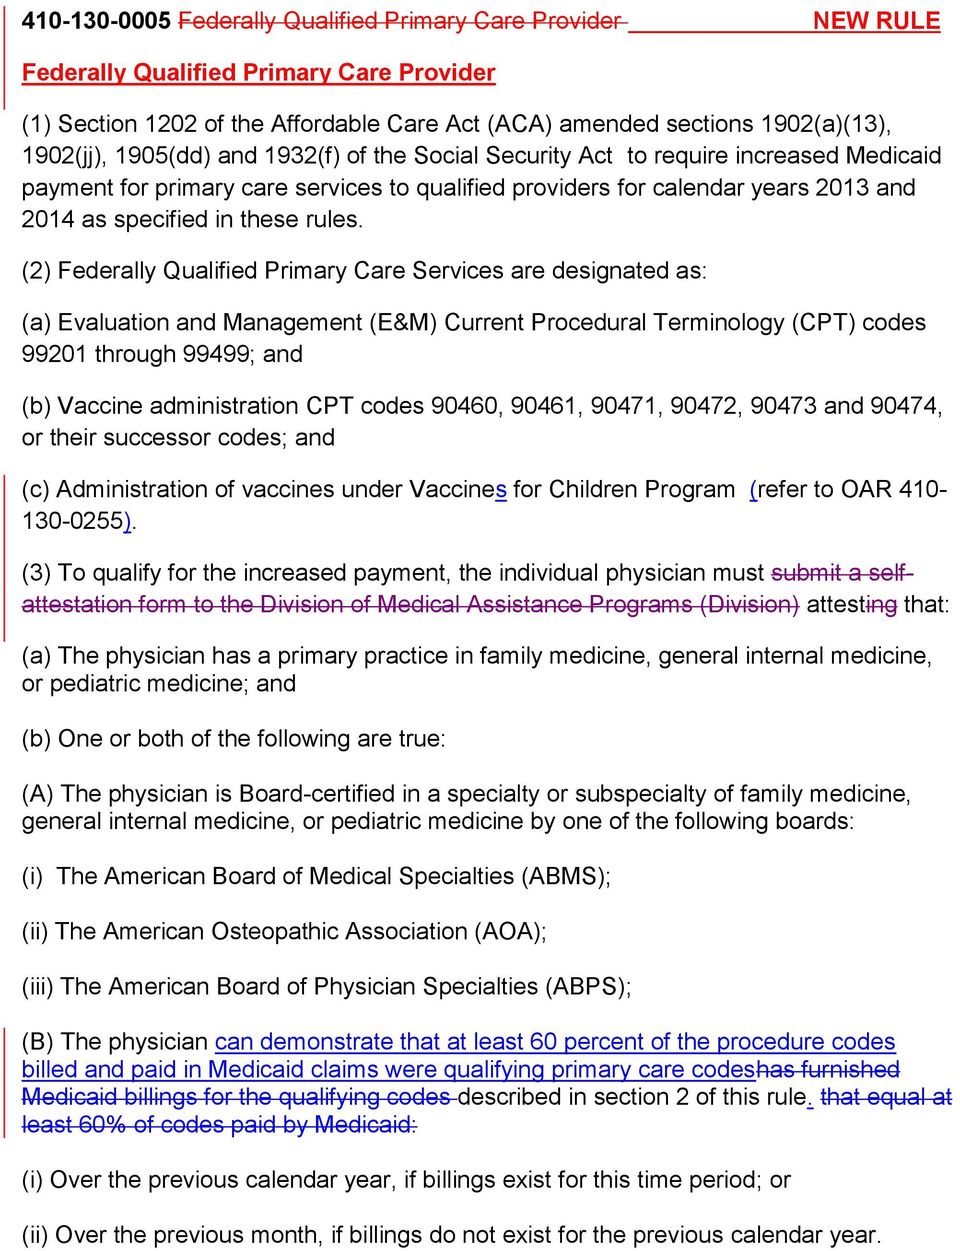 (2) Federally Qualified Primary Care Services are designated as: (a) Evaluation and Management (E&M) Current Procedural Terminology (CPT) codes 99201 through 99499; and (b) Vaccine administration CPT